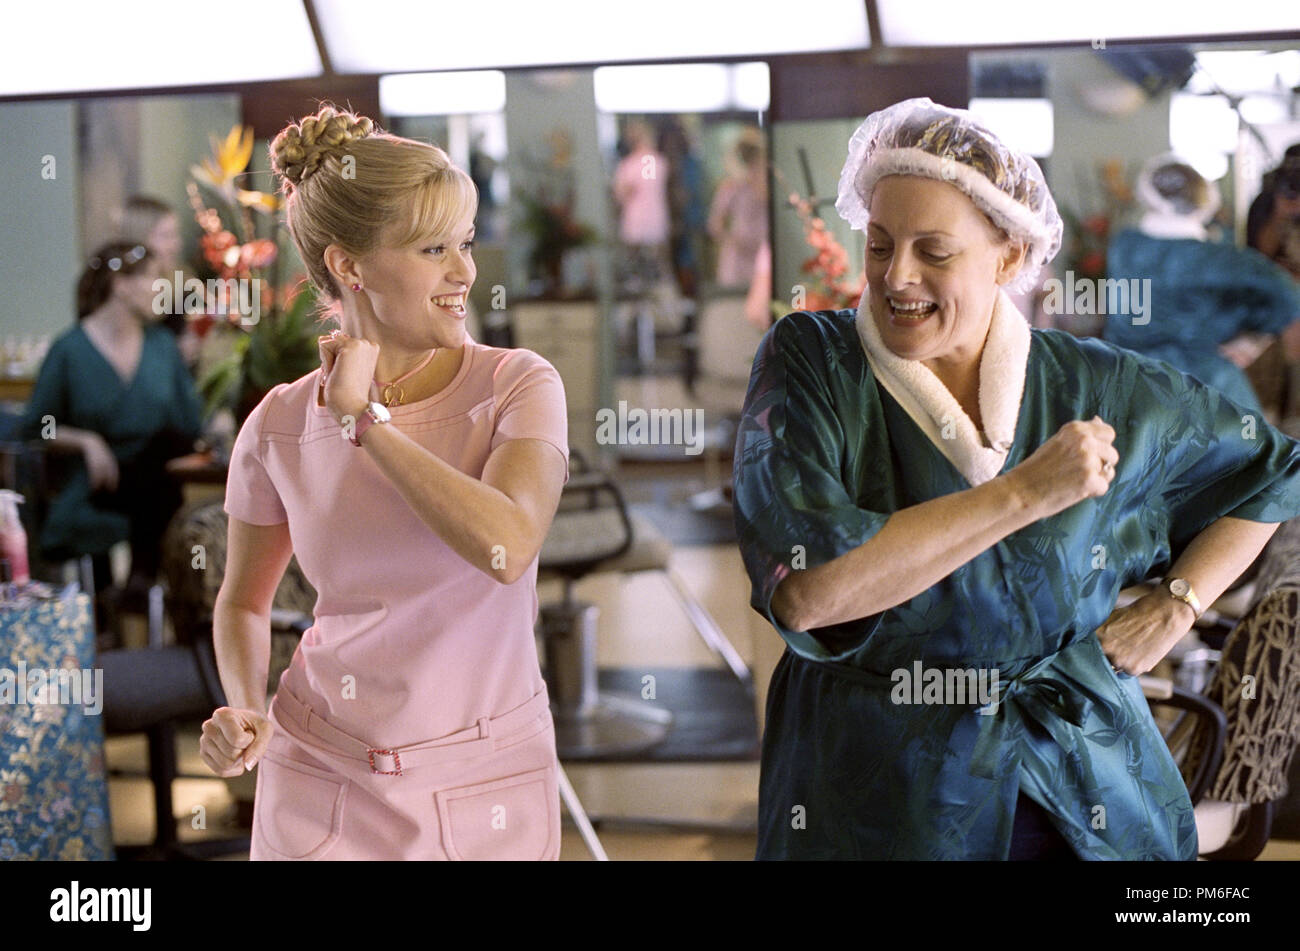 Film Still / Publicity Still "Legally Blonde 2: Red, White Reese Witherspoon, Dana Ivey